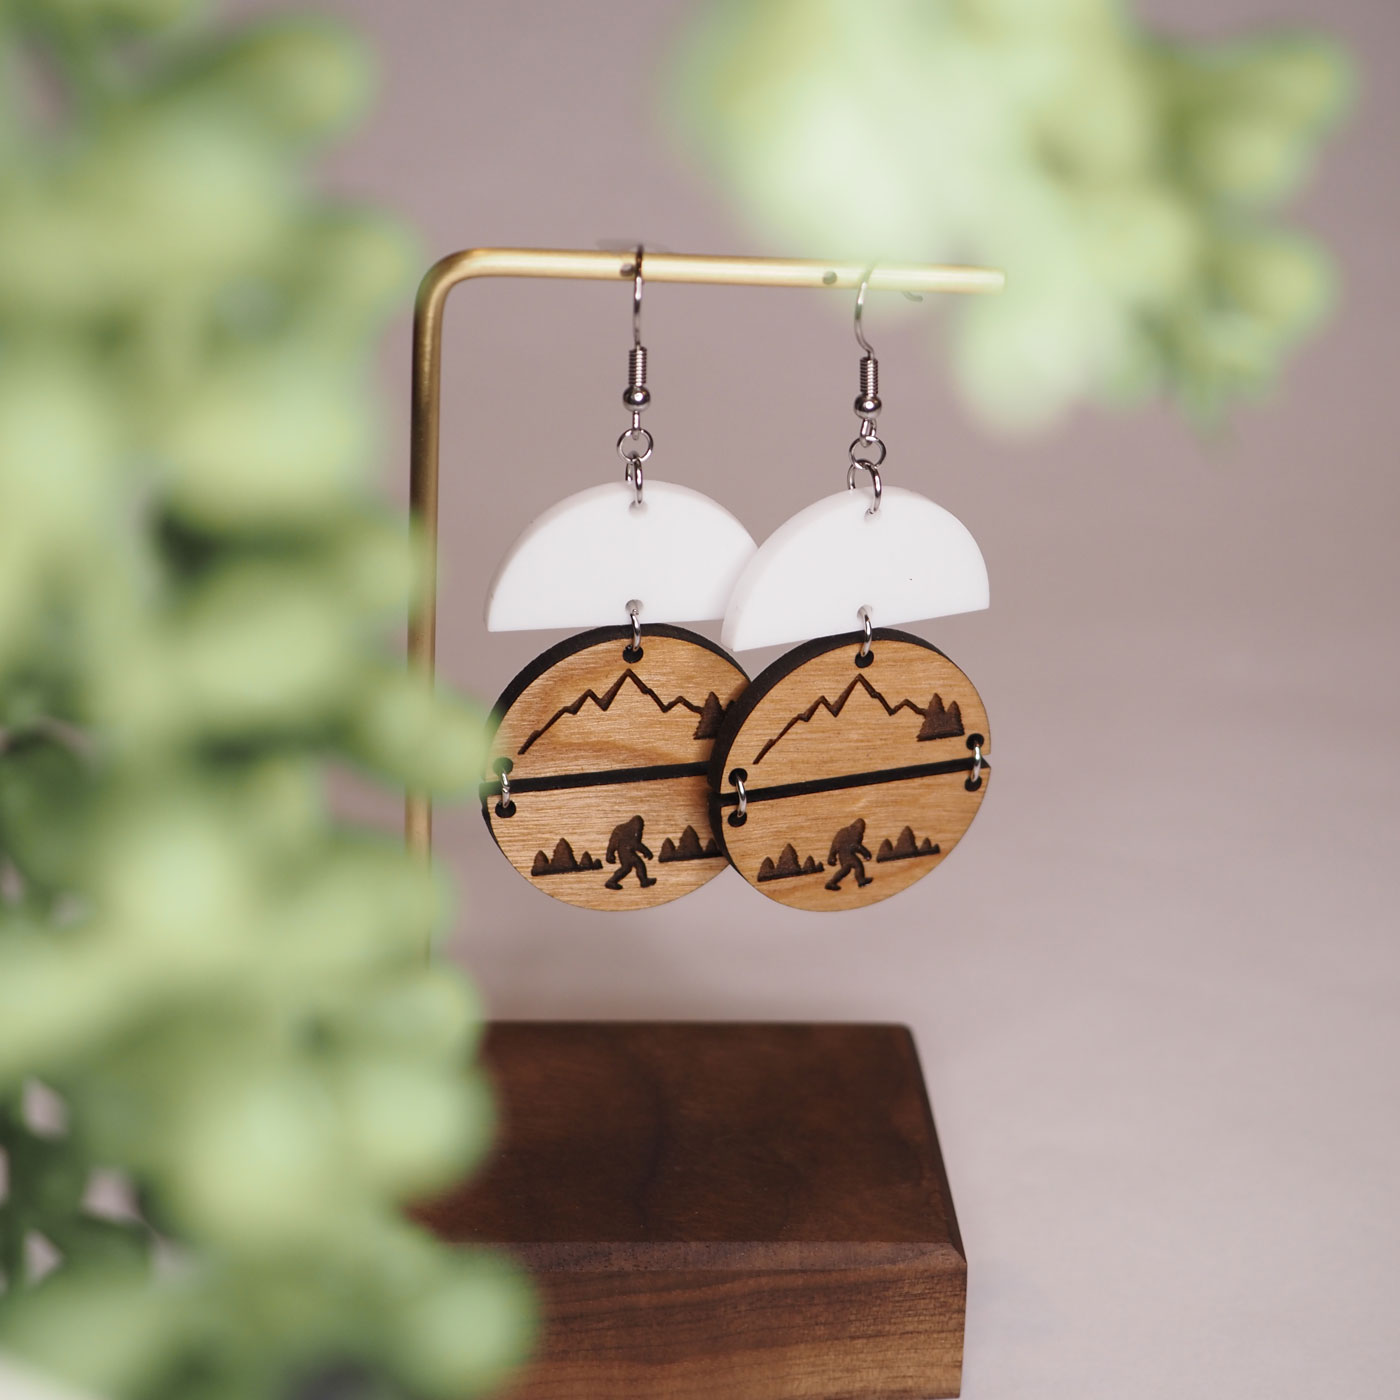 Cherry wood round earrings with bigfoot mountain scene hanging under white acrylic half circles